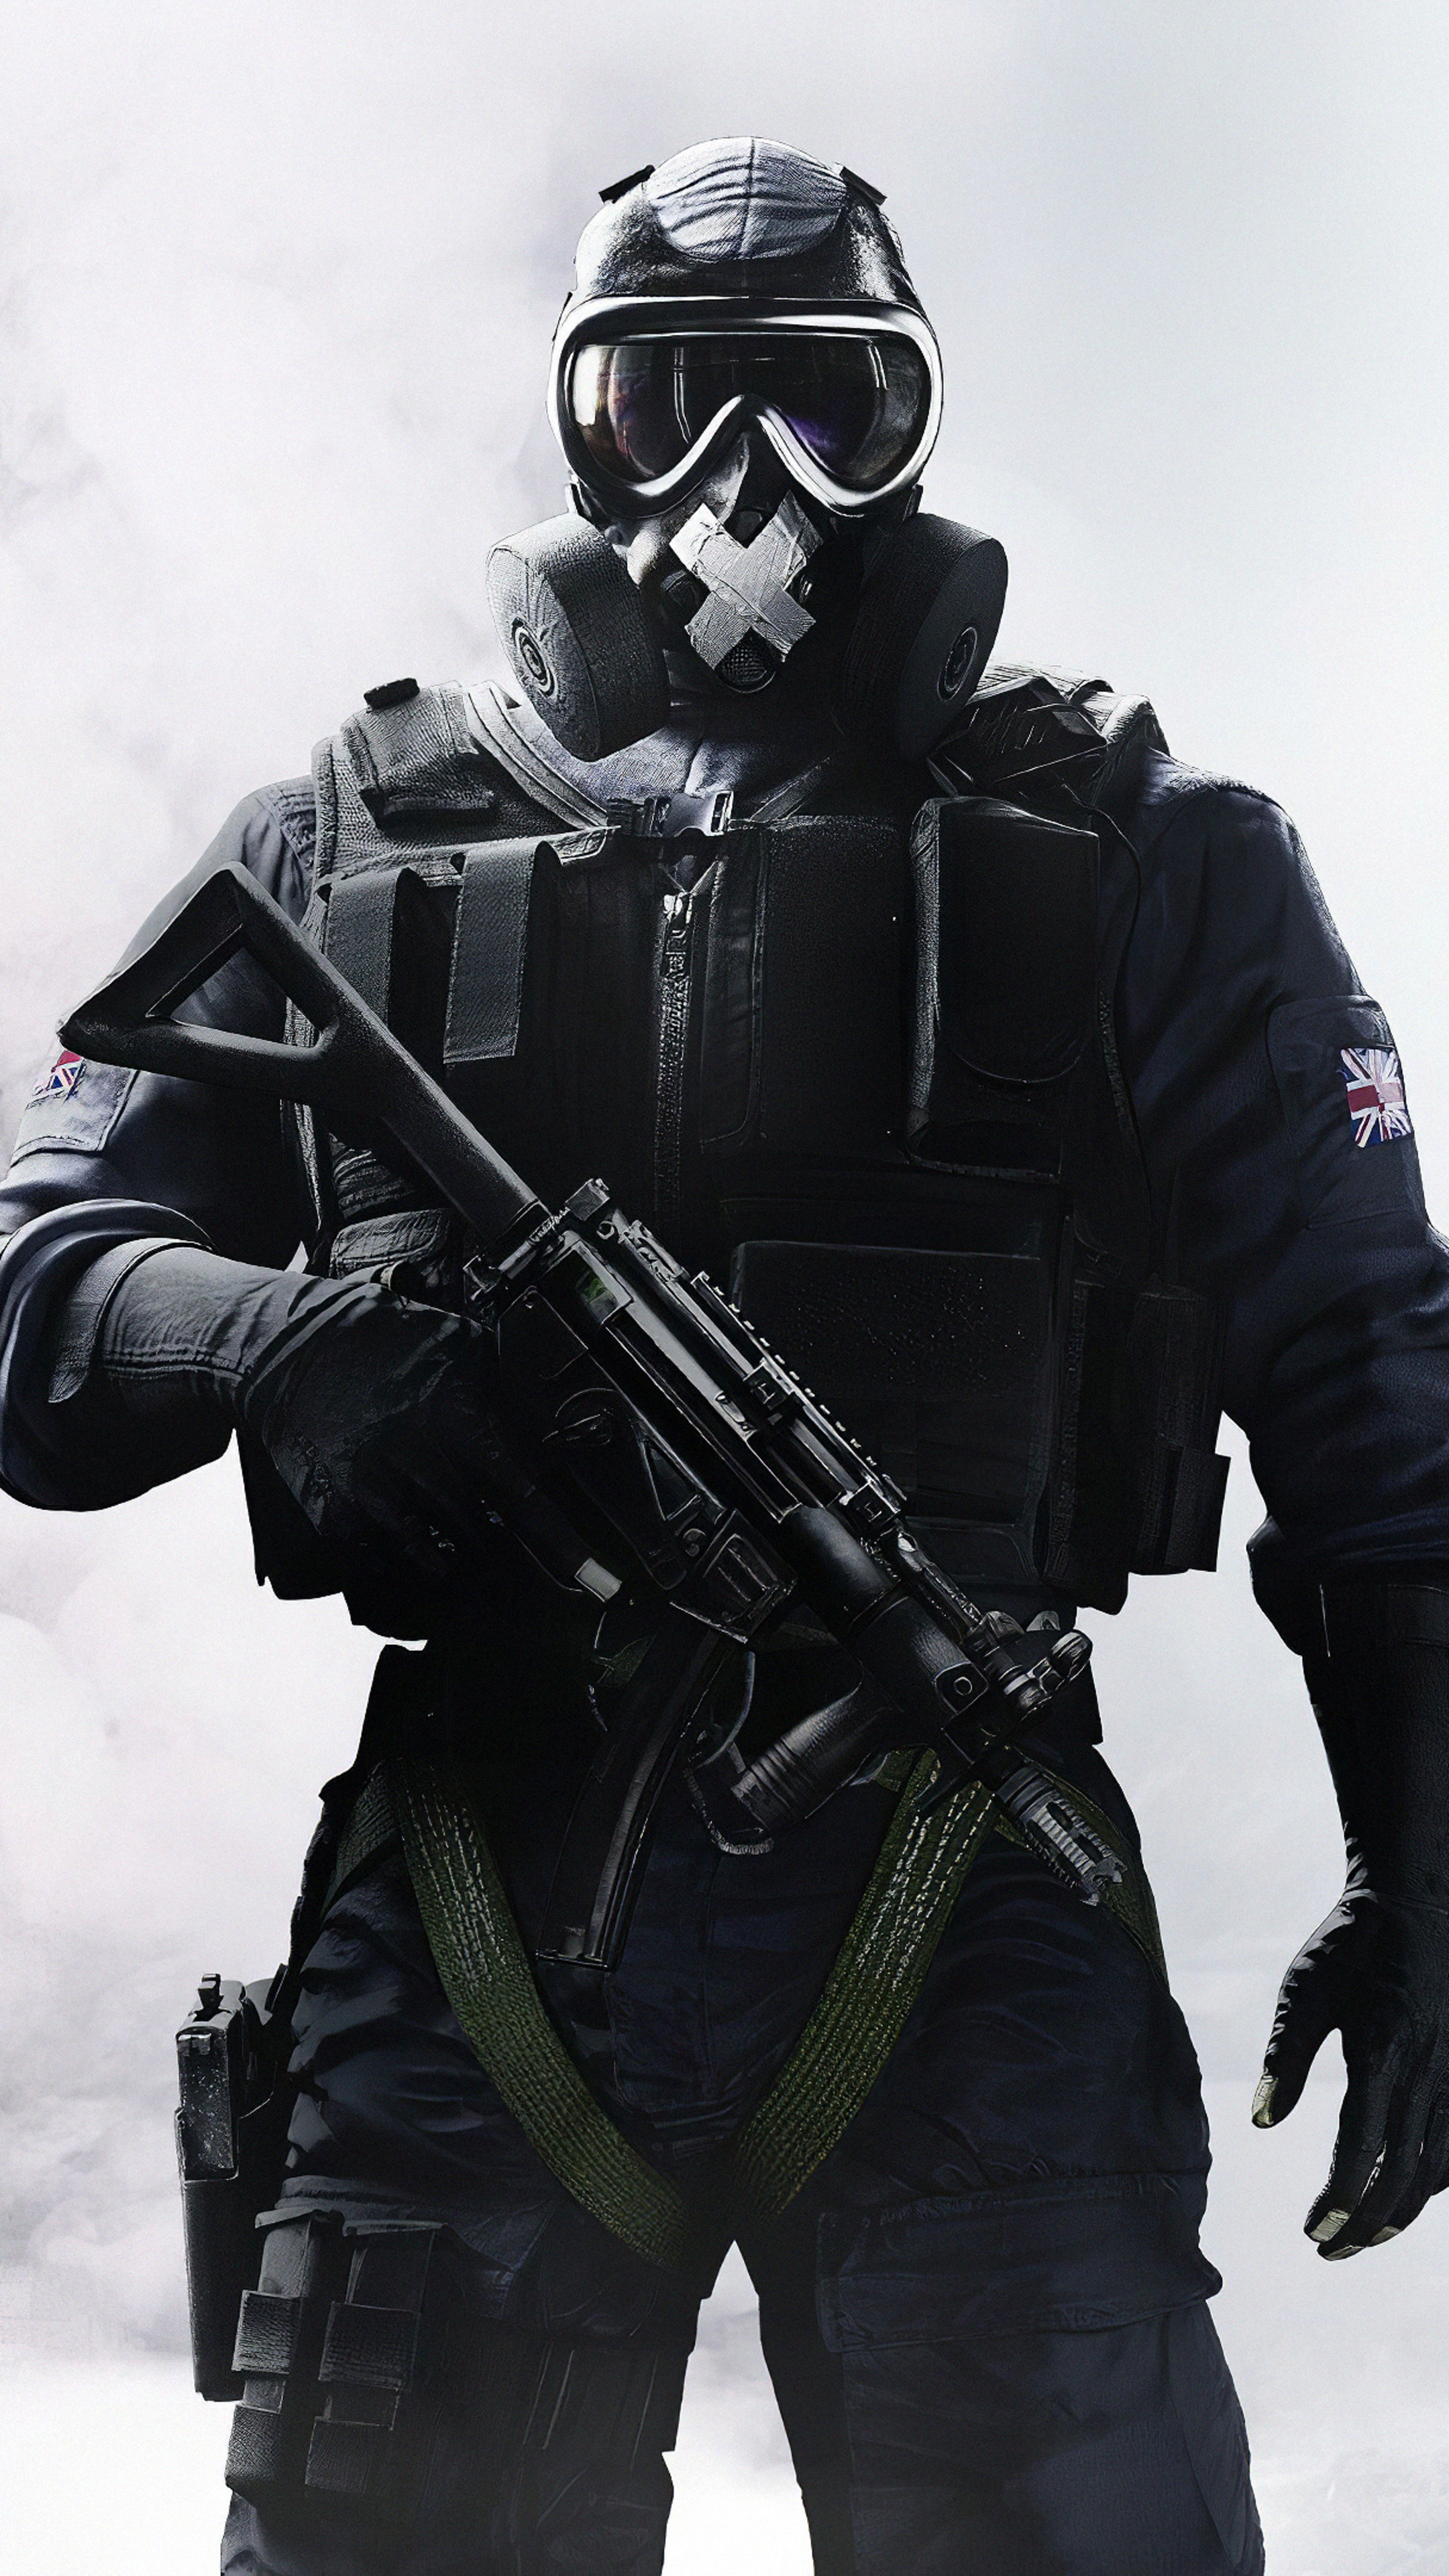 Rainbow Six Extraction: Siege, Soldier, Each operator has their own unique weapons and gadgets. 2160x3840 4K Wallpaper.